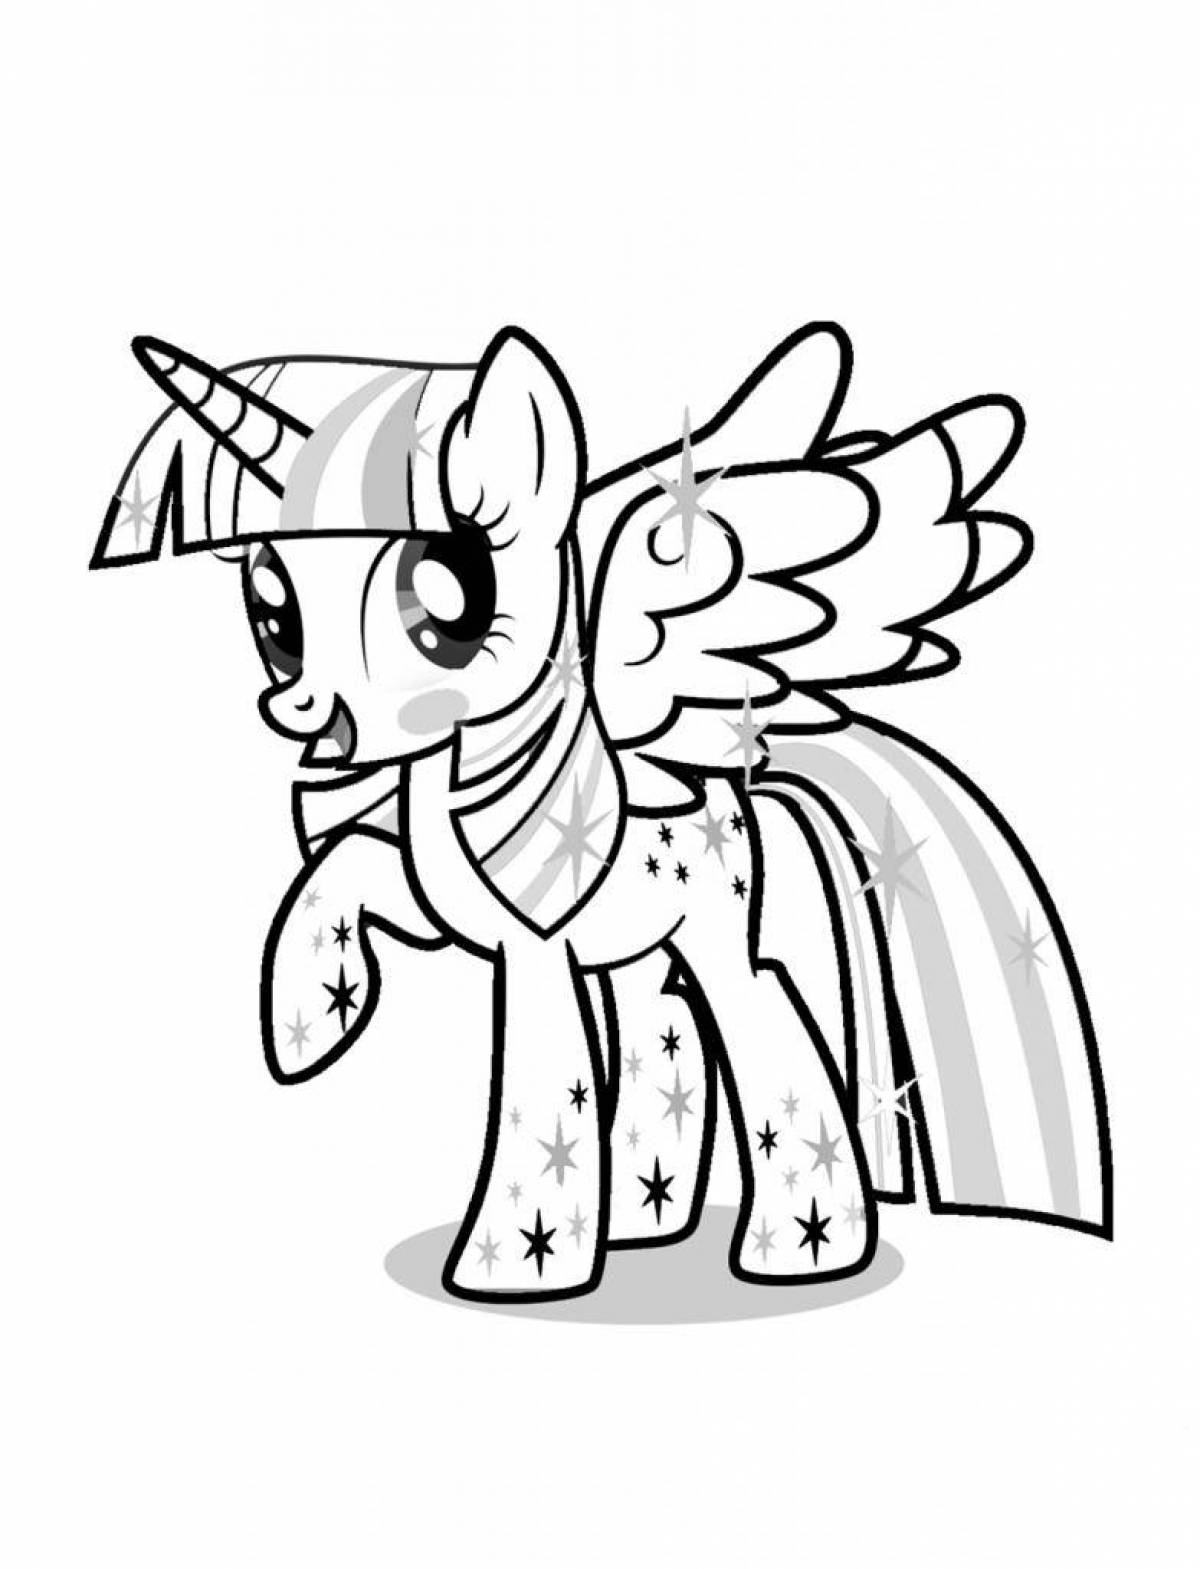 Brightly colored twilight sparkle coloring page